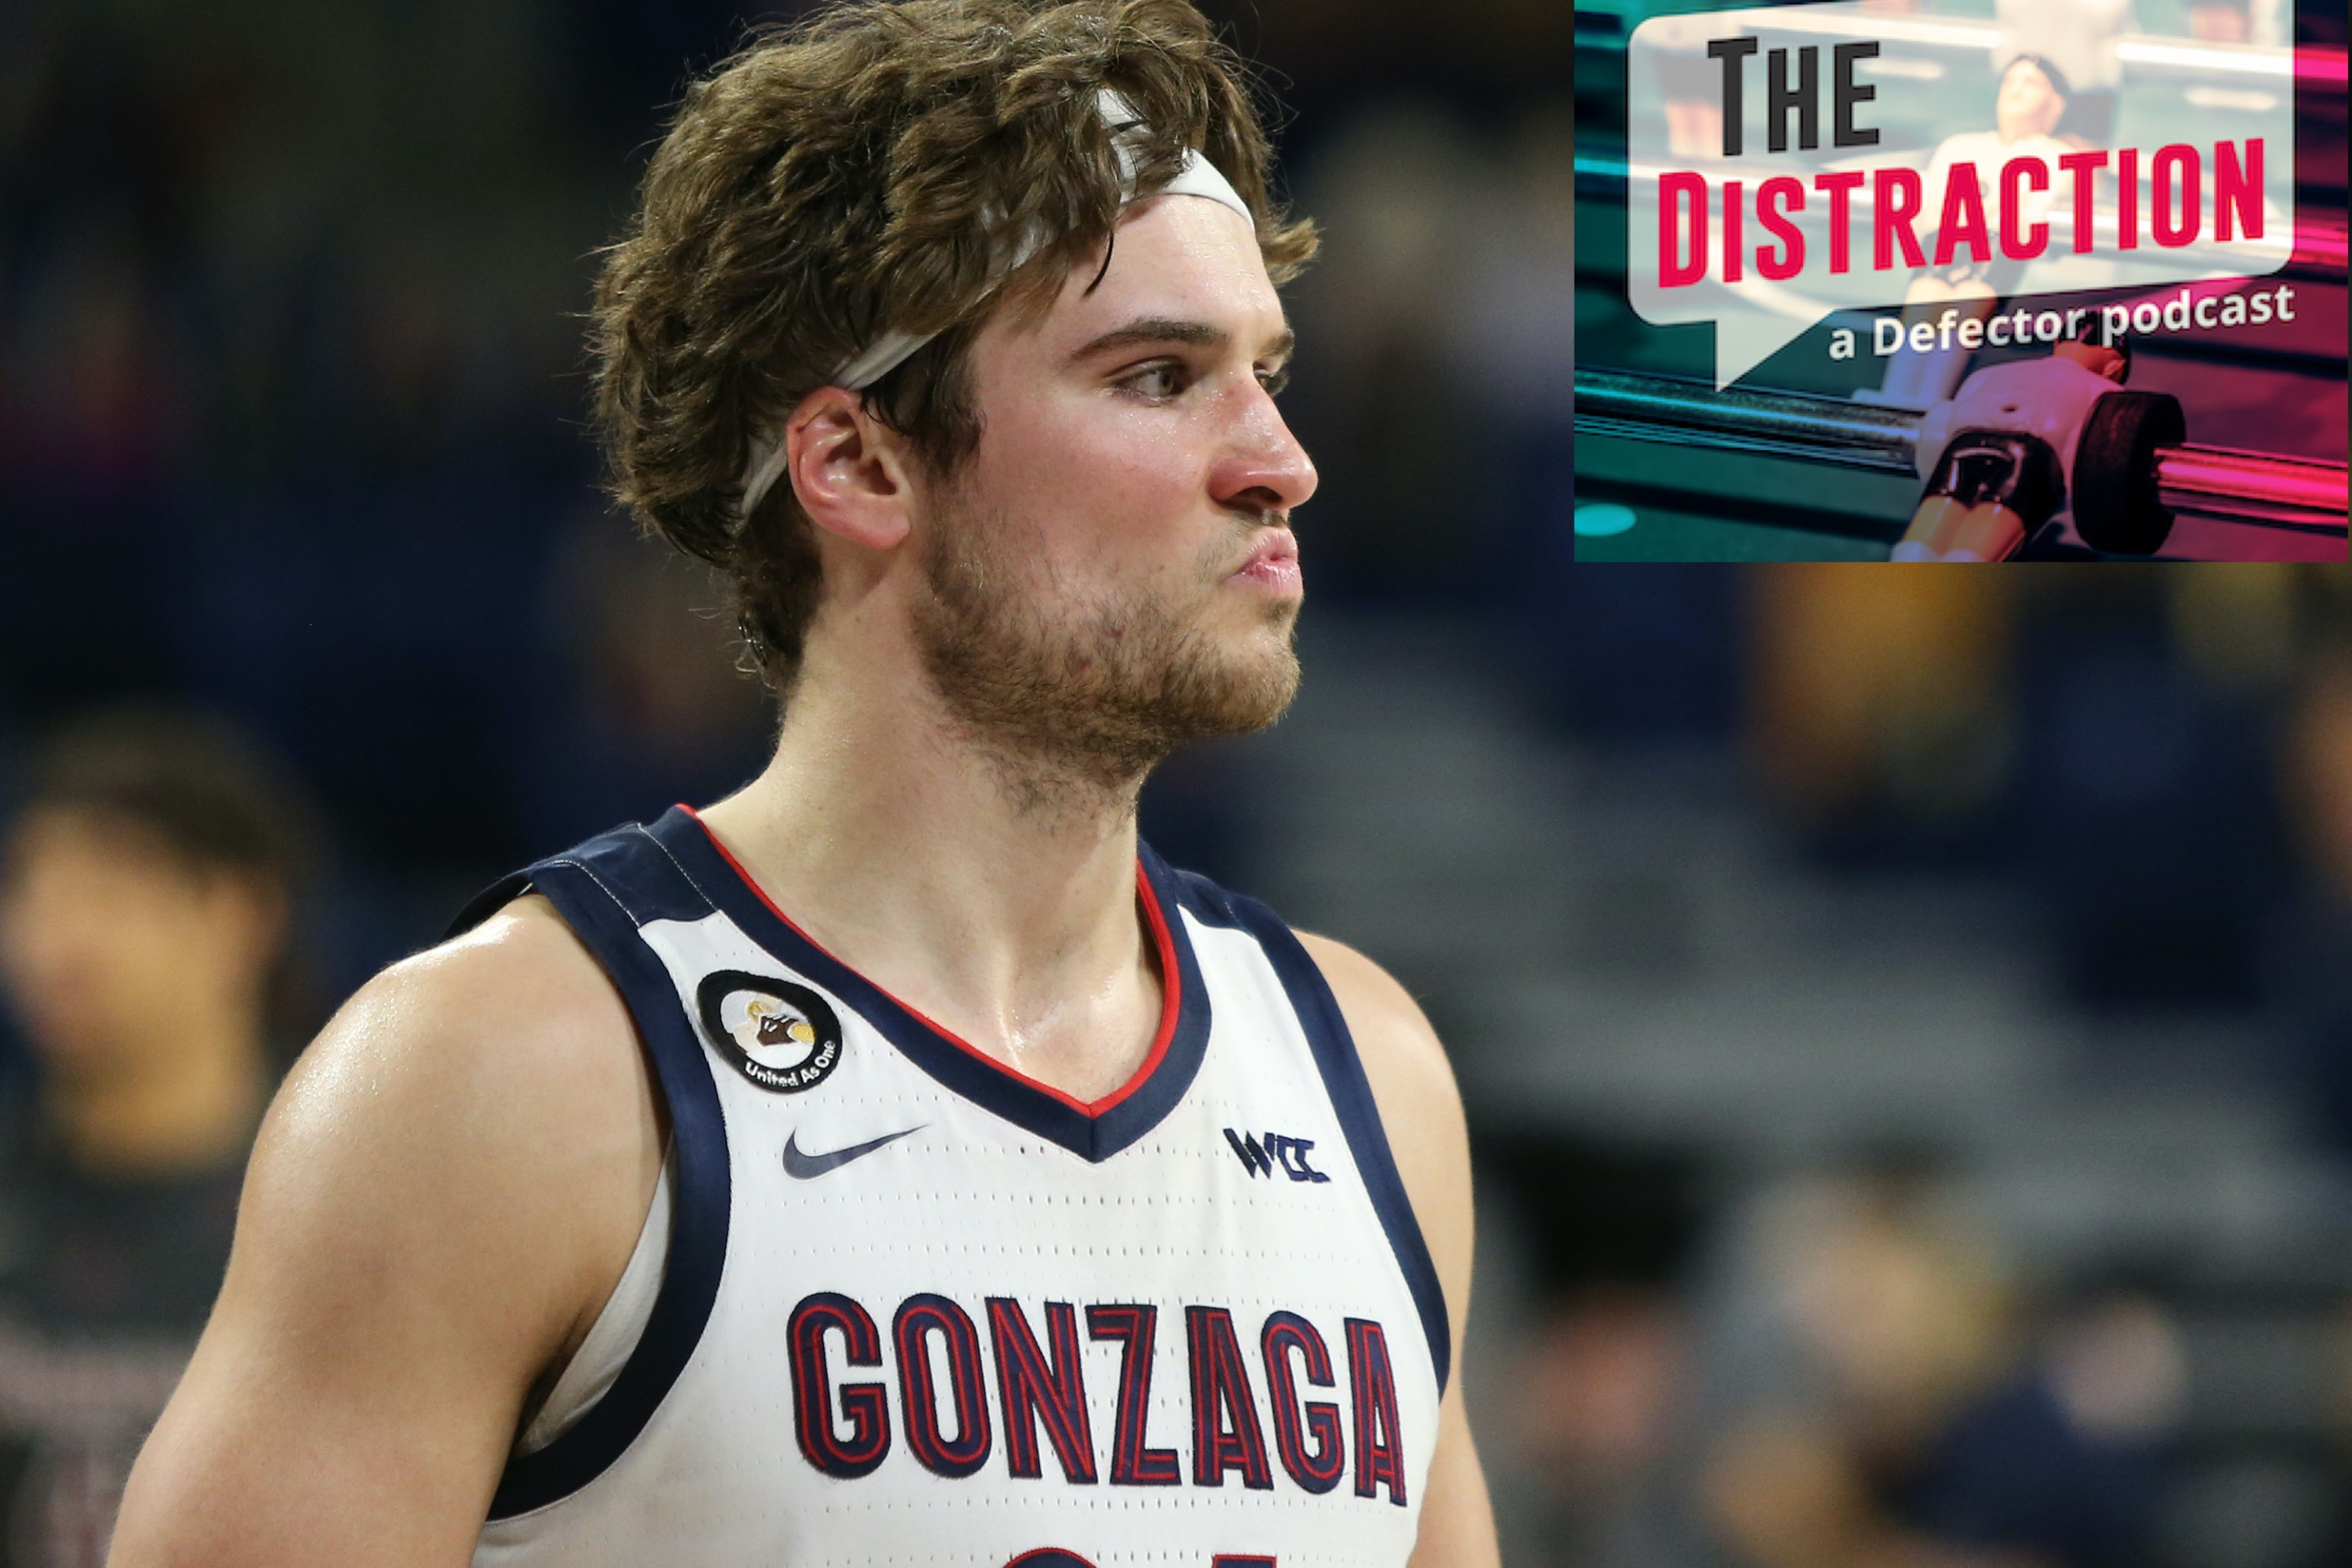 Gonzaga's Corey Kispert, seen here honestly kind of mad-dogging The Distraction logo.